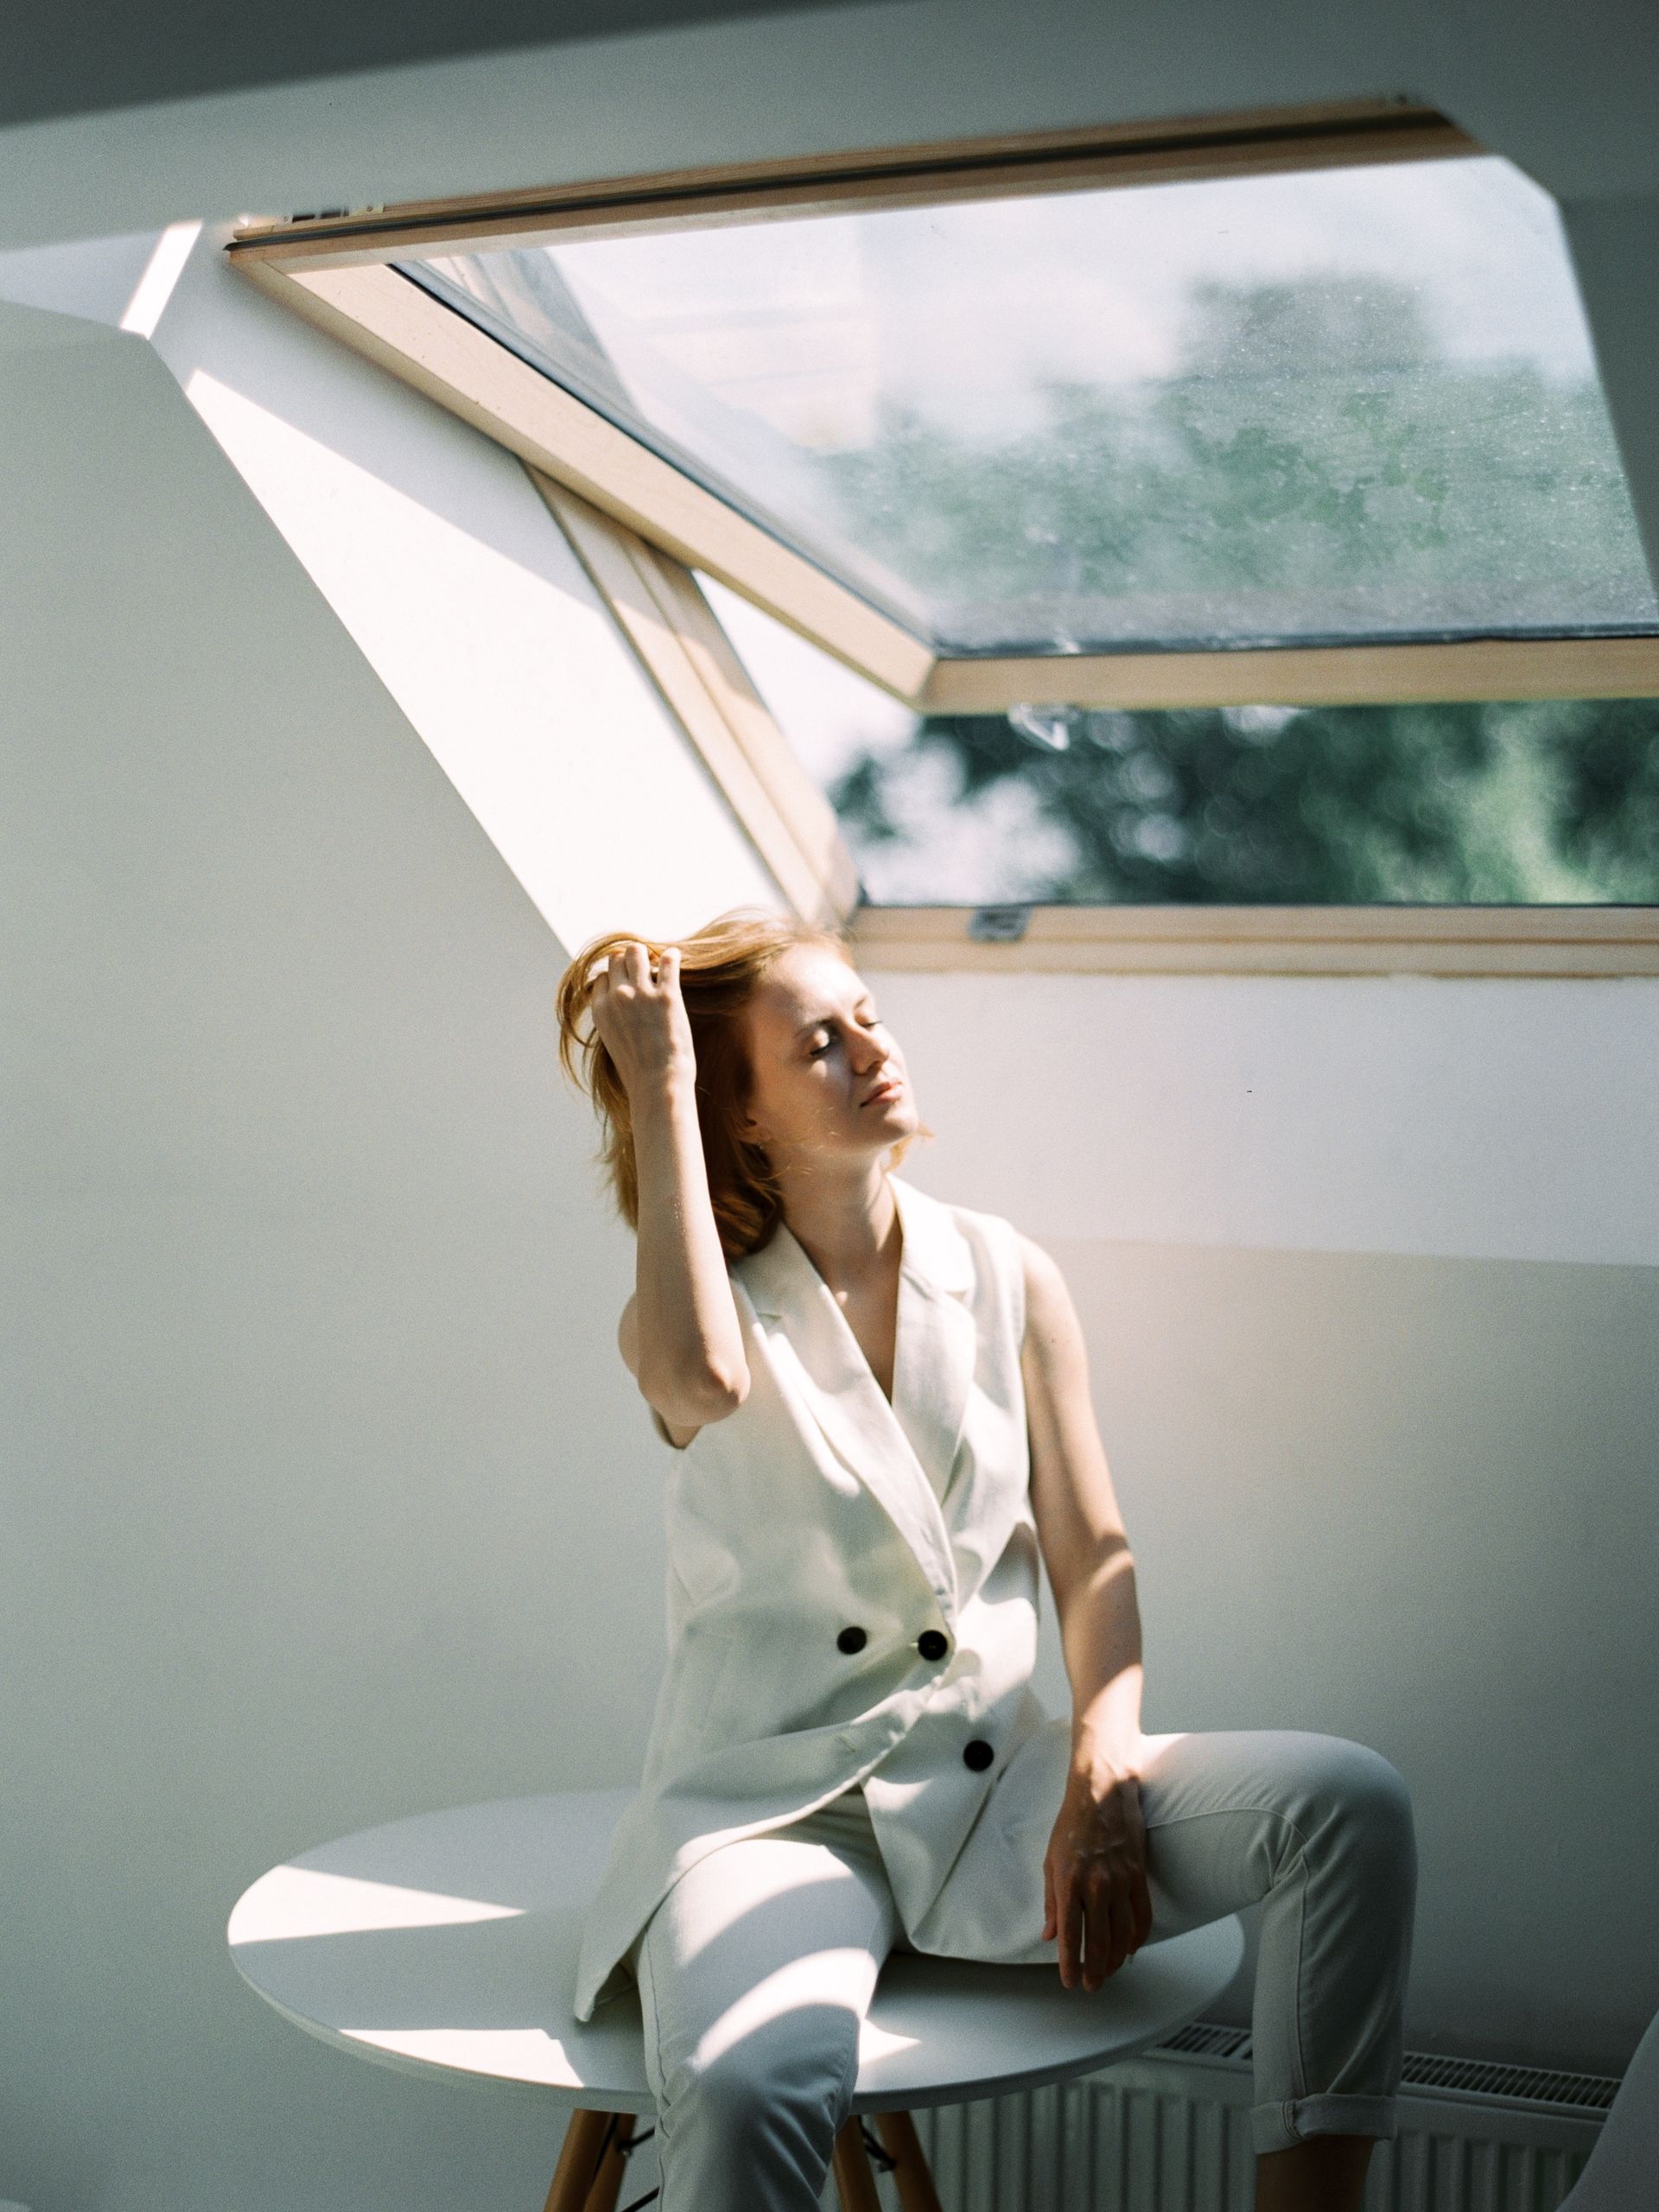 A woman sitting underneath an open window with sunlight pouring in.